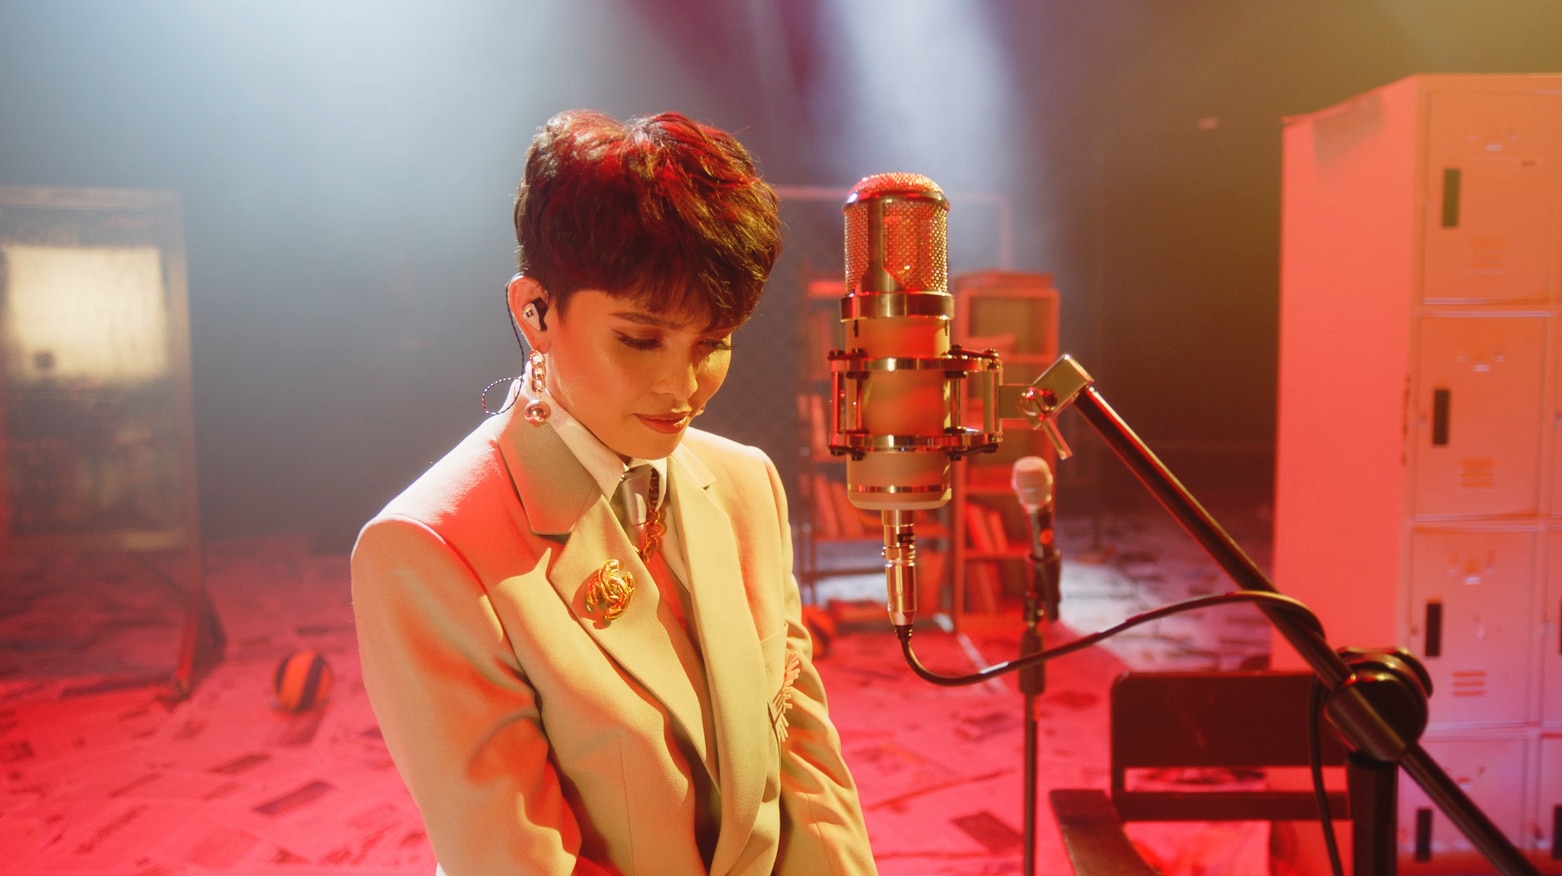 KZ drops surprise version of "Have Yourself A Merry Little Christmas"